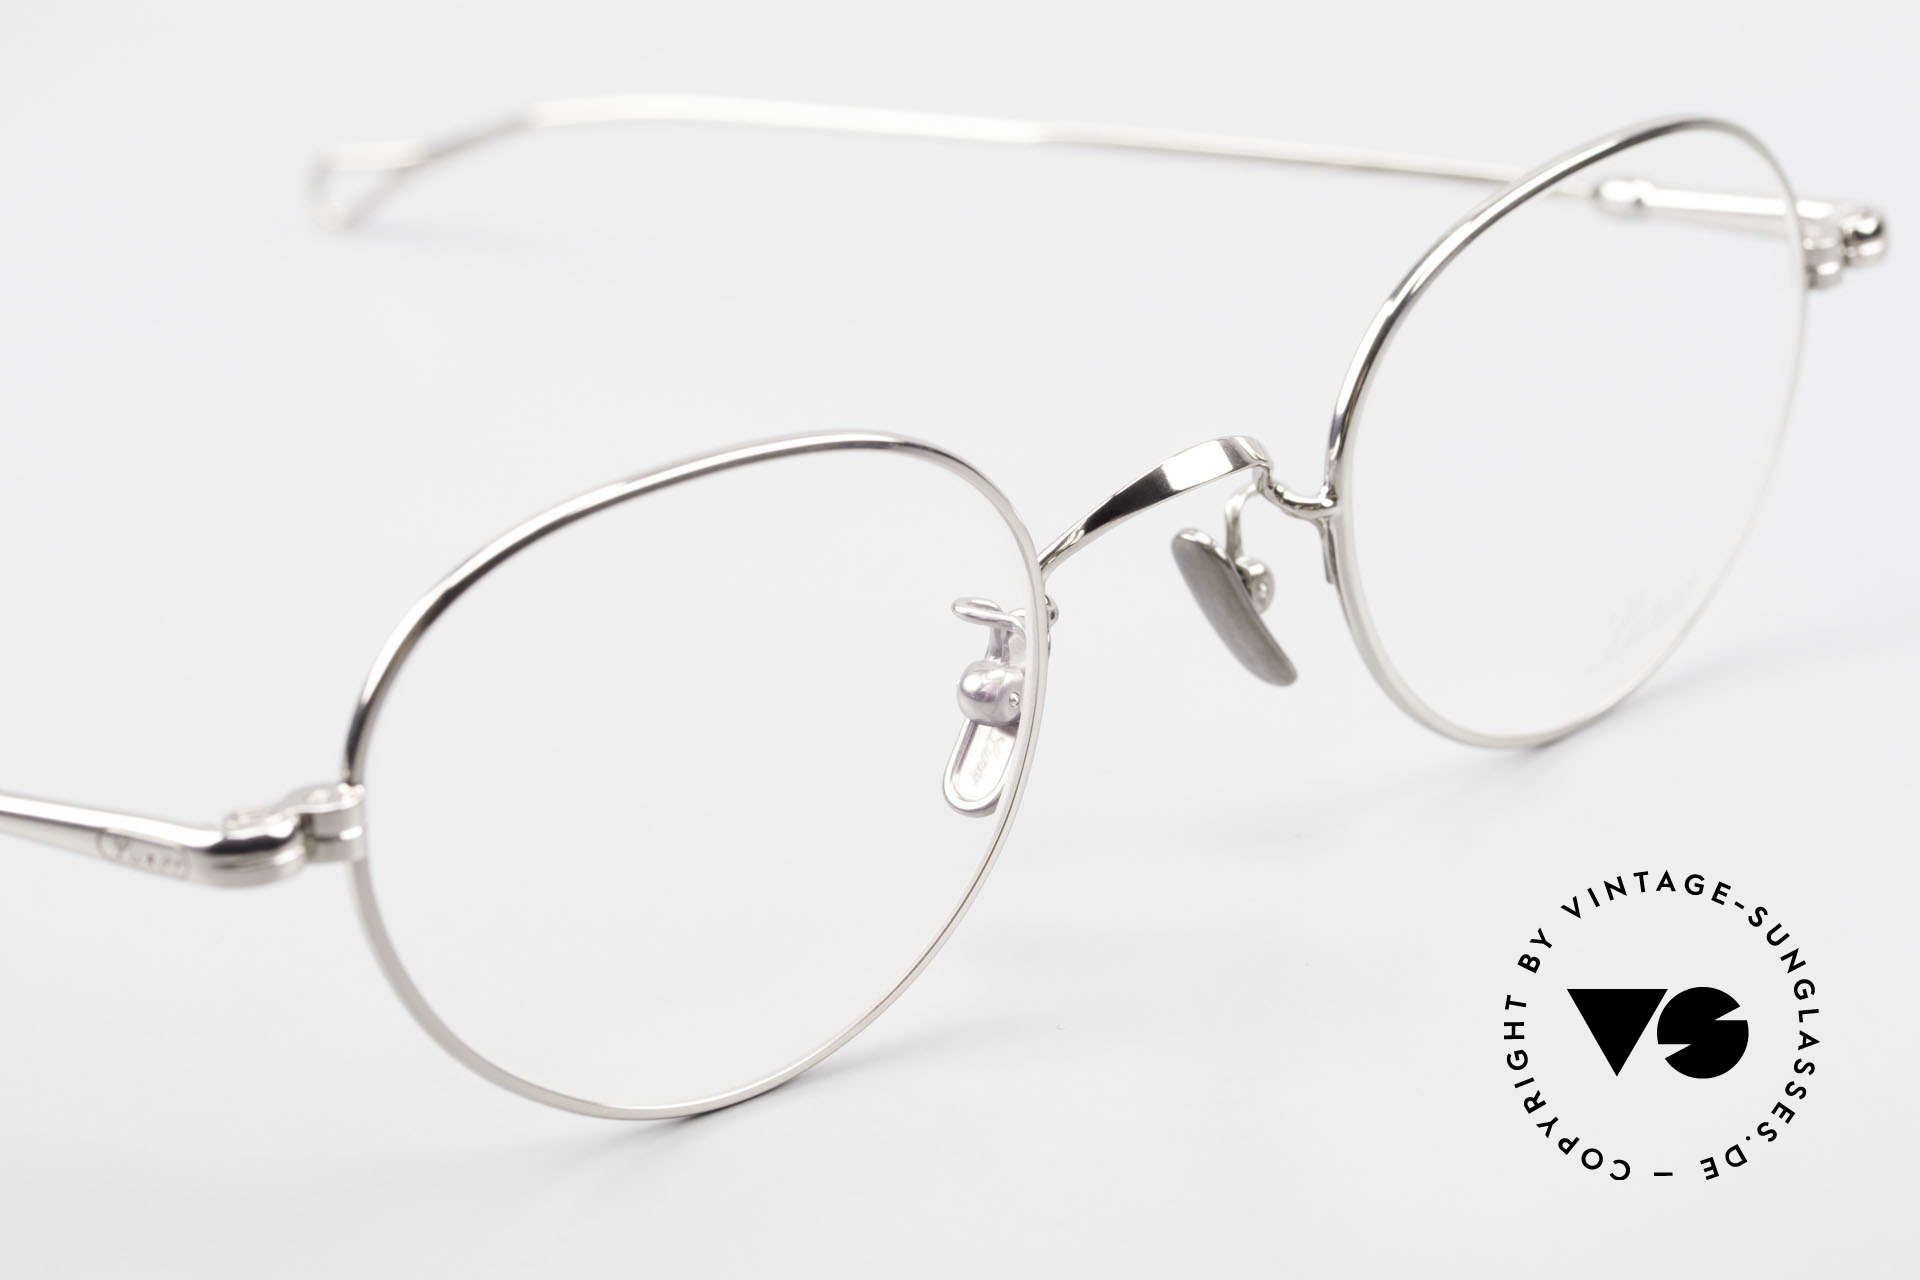 Lunor V 108 Panto Frame Platinum Plated, thus, we decided to take it into our vintage collection, Made for Men